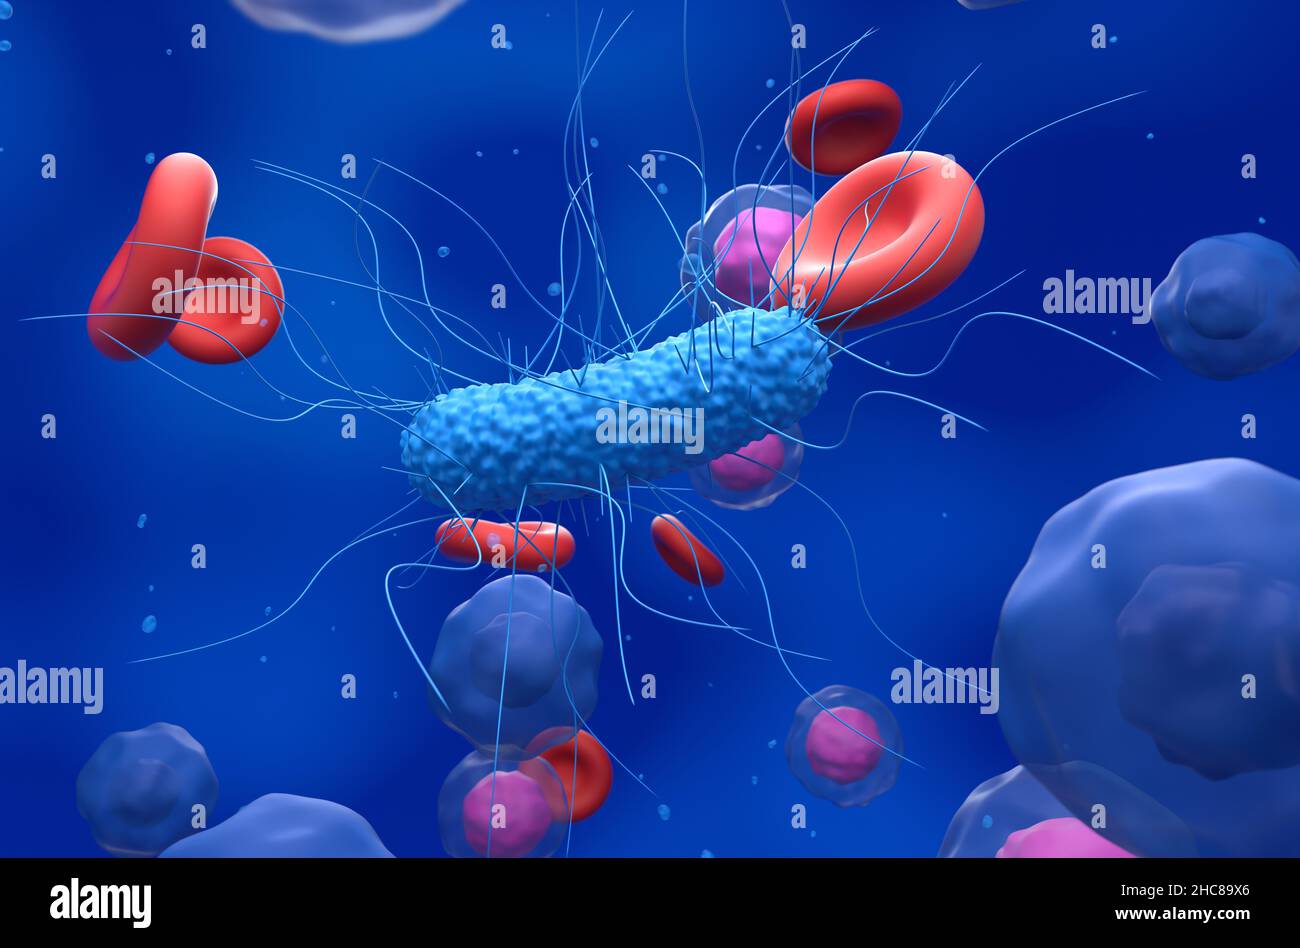 General bacteria in the blood flow - closeup view 3d illustration Stock Photo